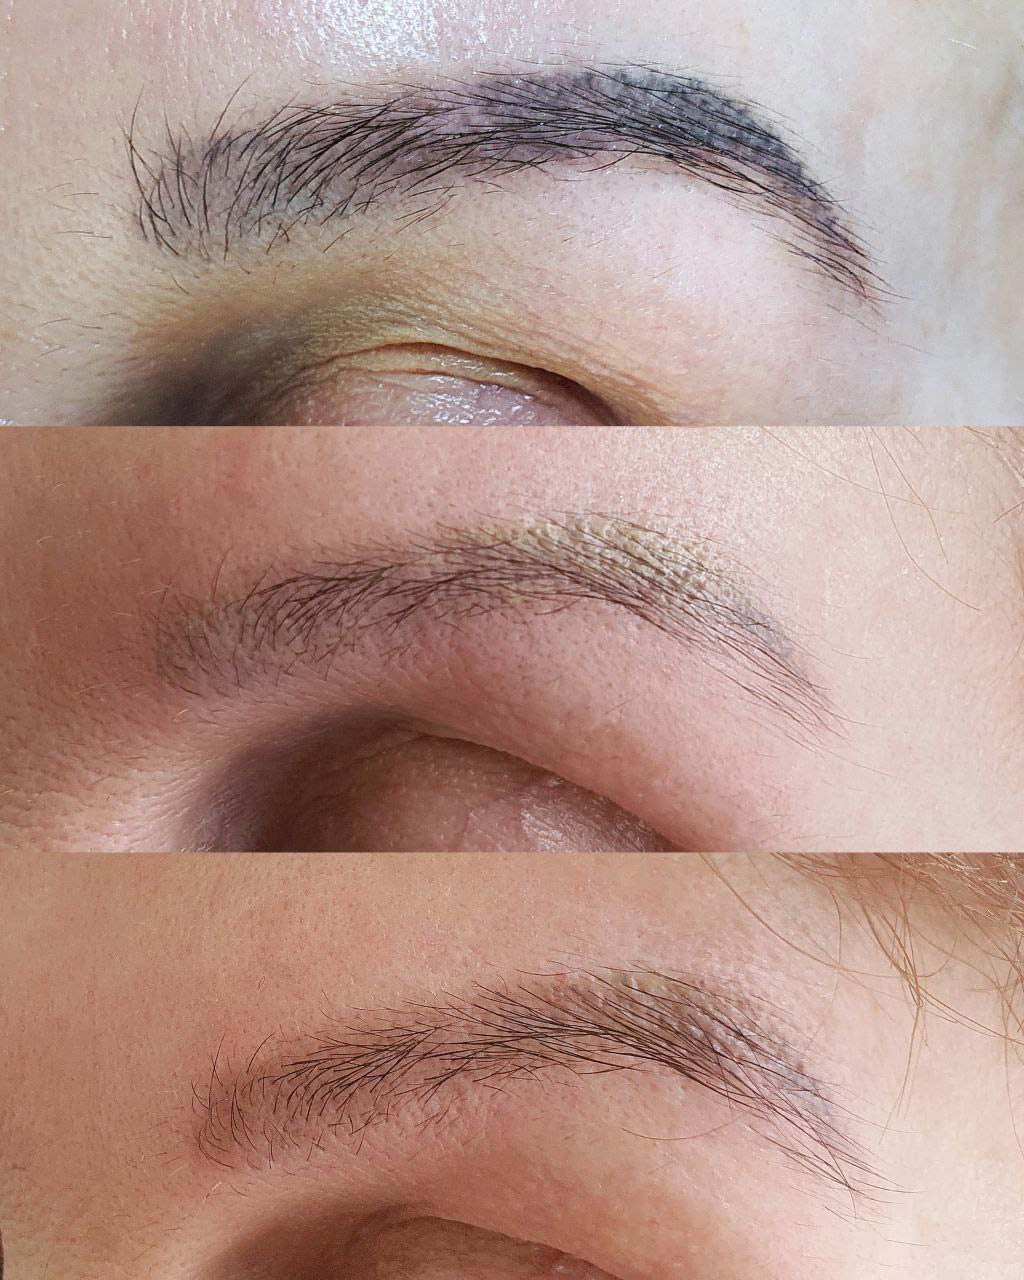 Laser Tattoo Removal. Cosmetic and Mediical Tattoo by Dasha. Permanent makeup and reconstructive tattoo, scalp micro-pigmentation in Christchurch, New Zealand